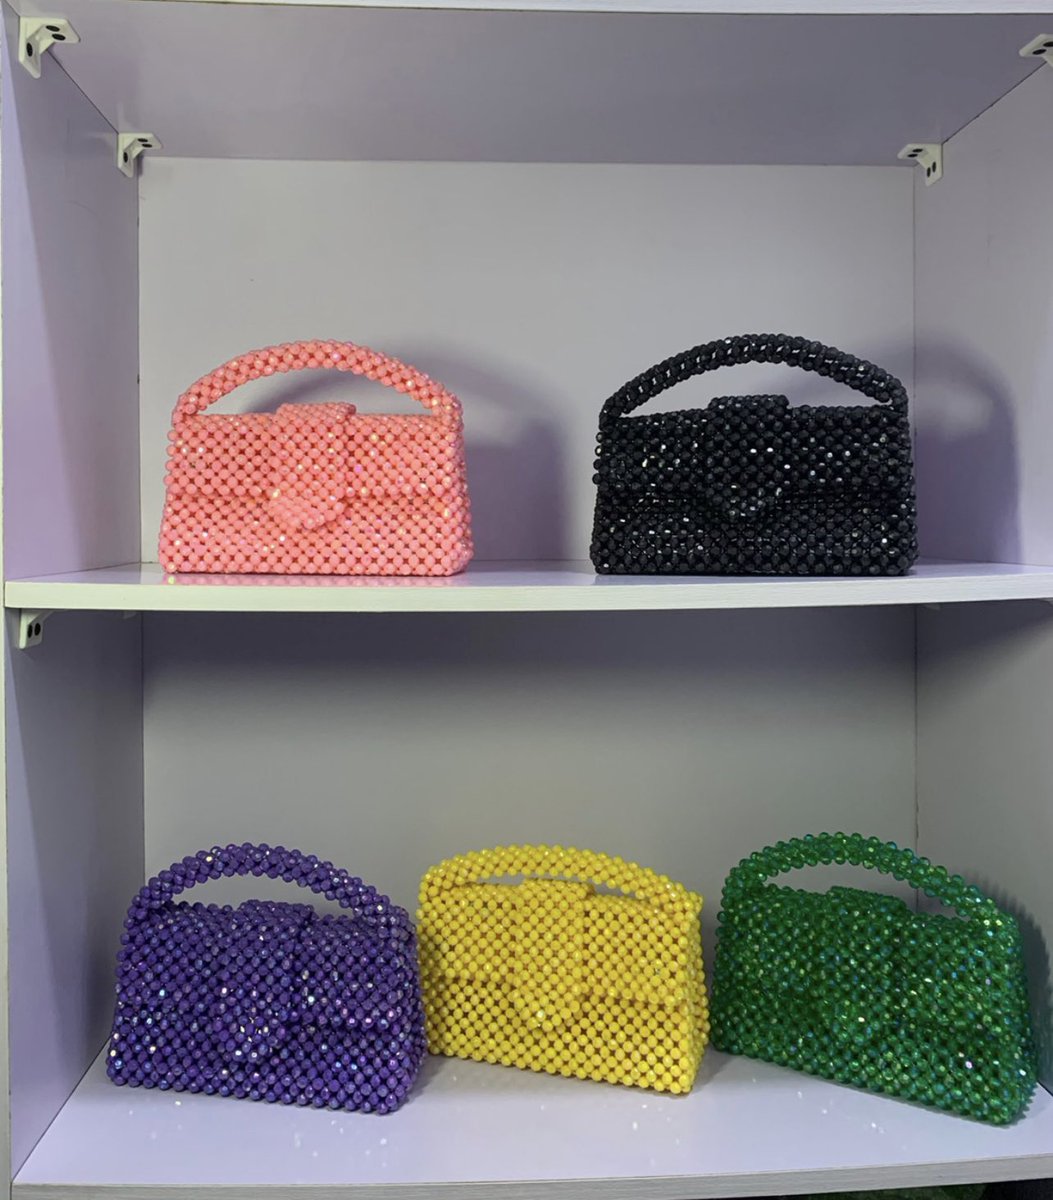 Which of this beads bag color can you rock??